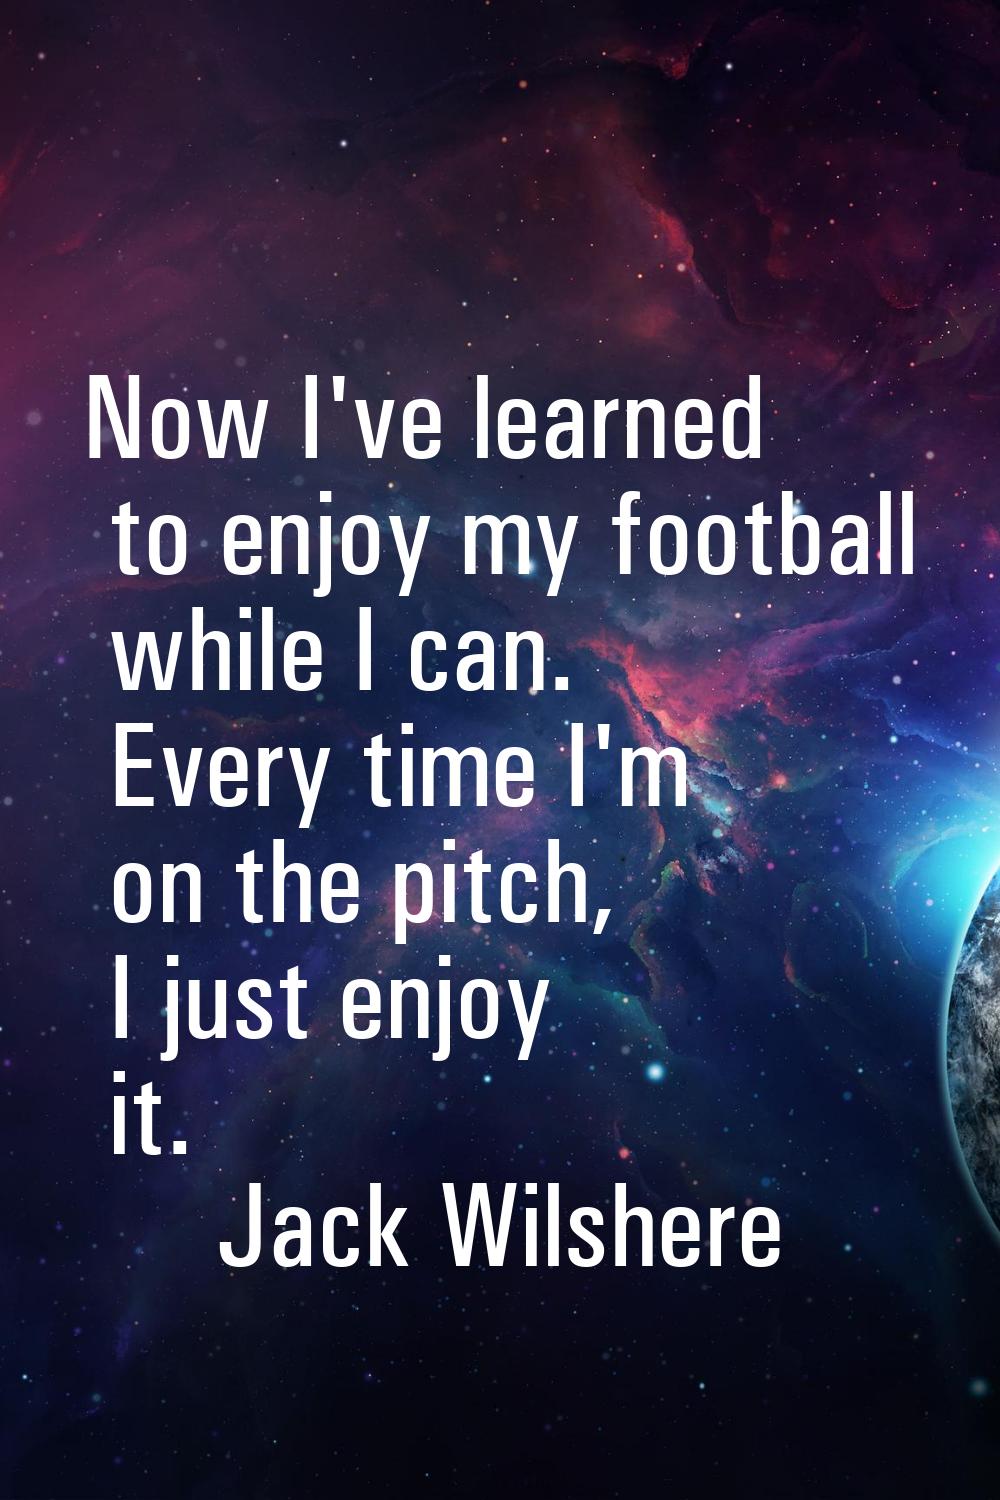 Now I've learned to enjoy my football while I can. Every time I'm on the pitch, I just enjoy it.